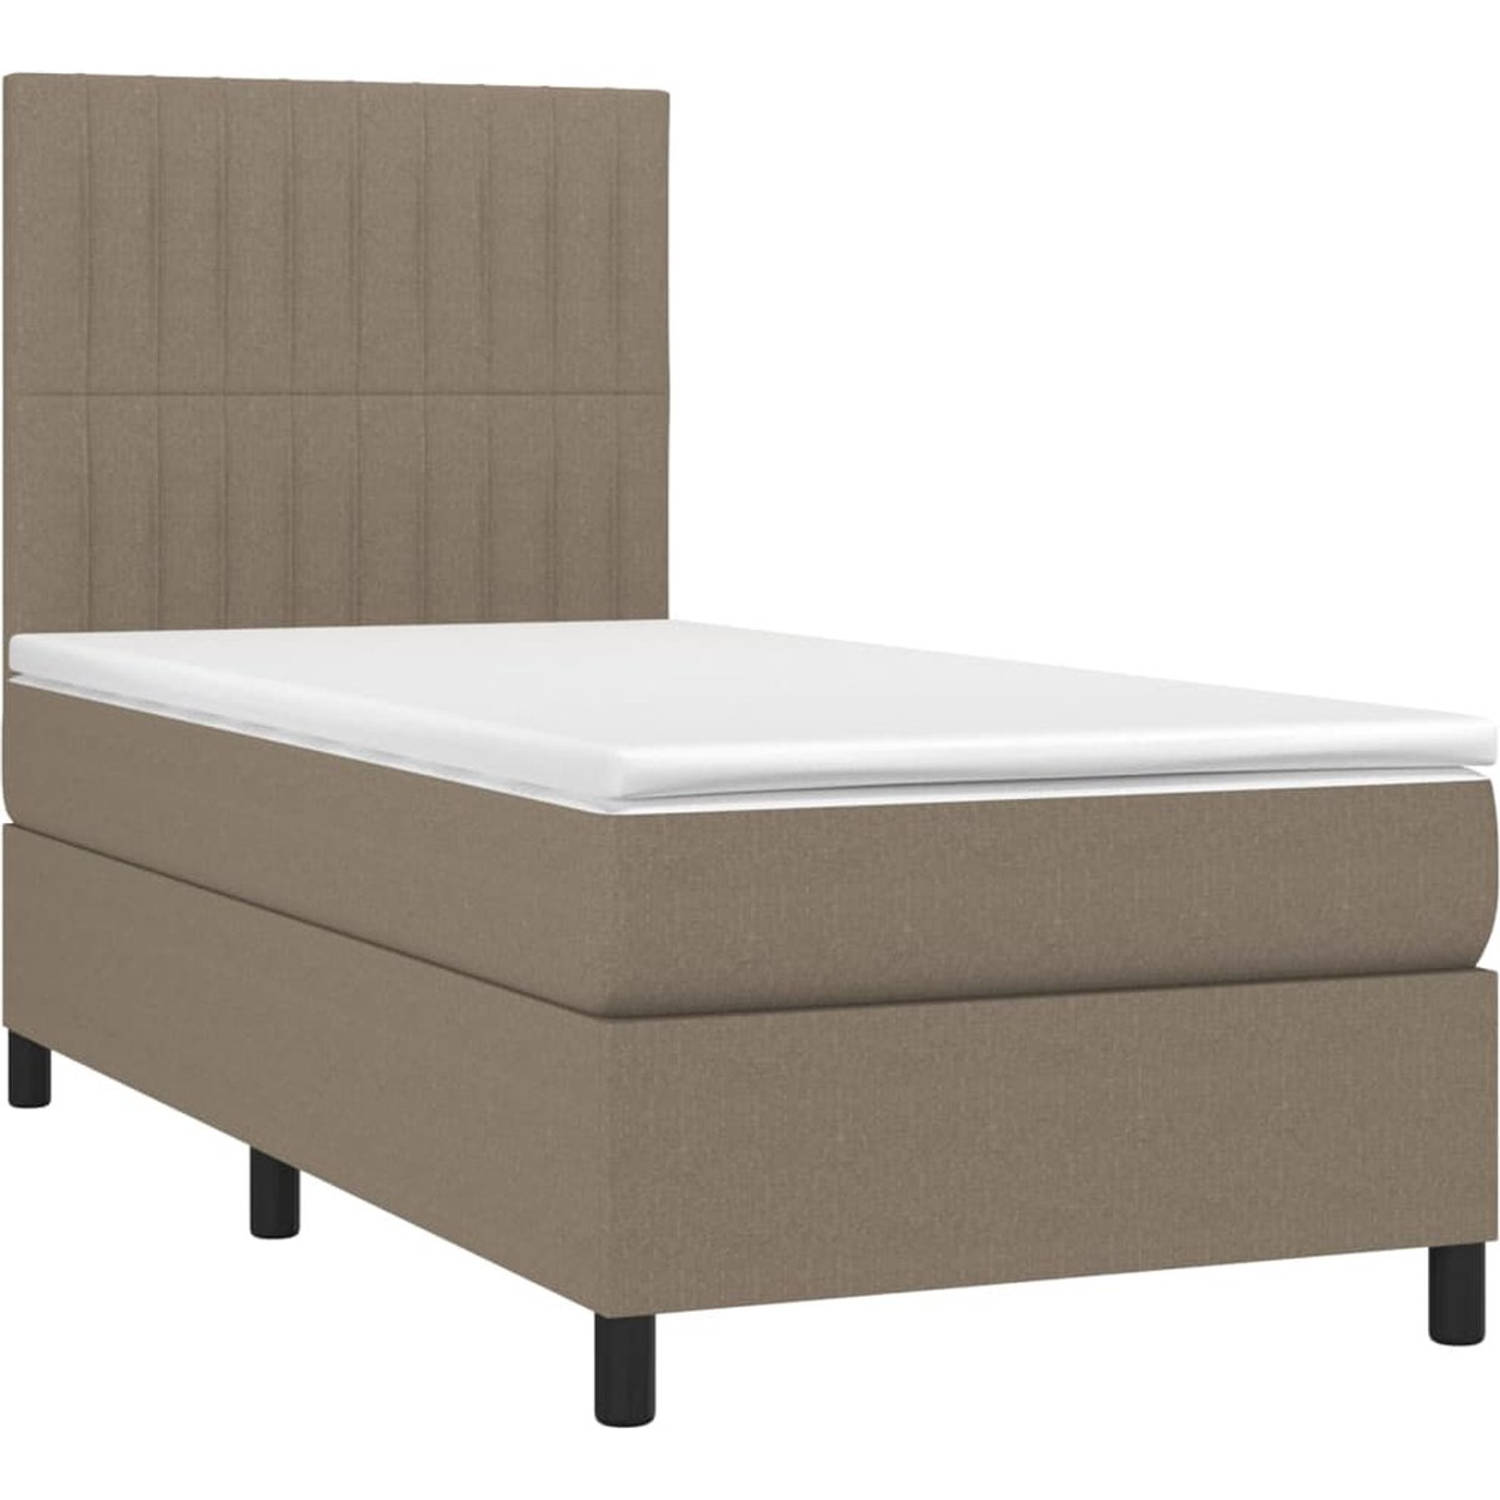 The Living Store Boxspring Bed - LED - 203 x 80 x 118/128 cm - Taupe - 100% polyester - Pocketvering matras - 80 x 200 x 20 cm - Wit/Taupe - Schuim topmatras - 80 x 200 x 5 cm - LE